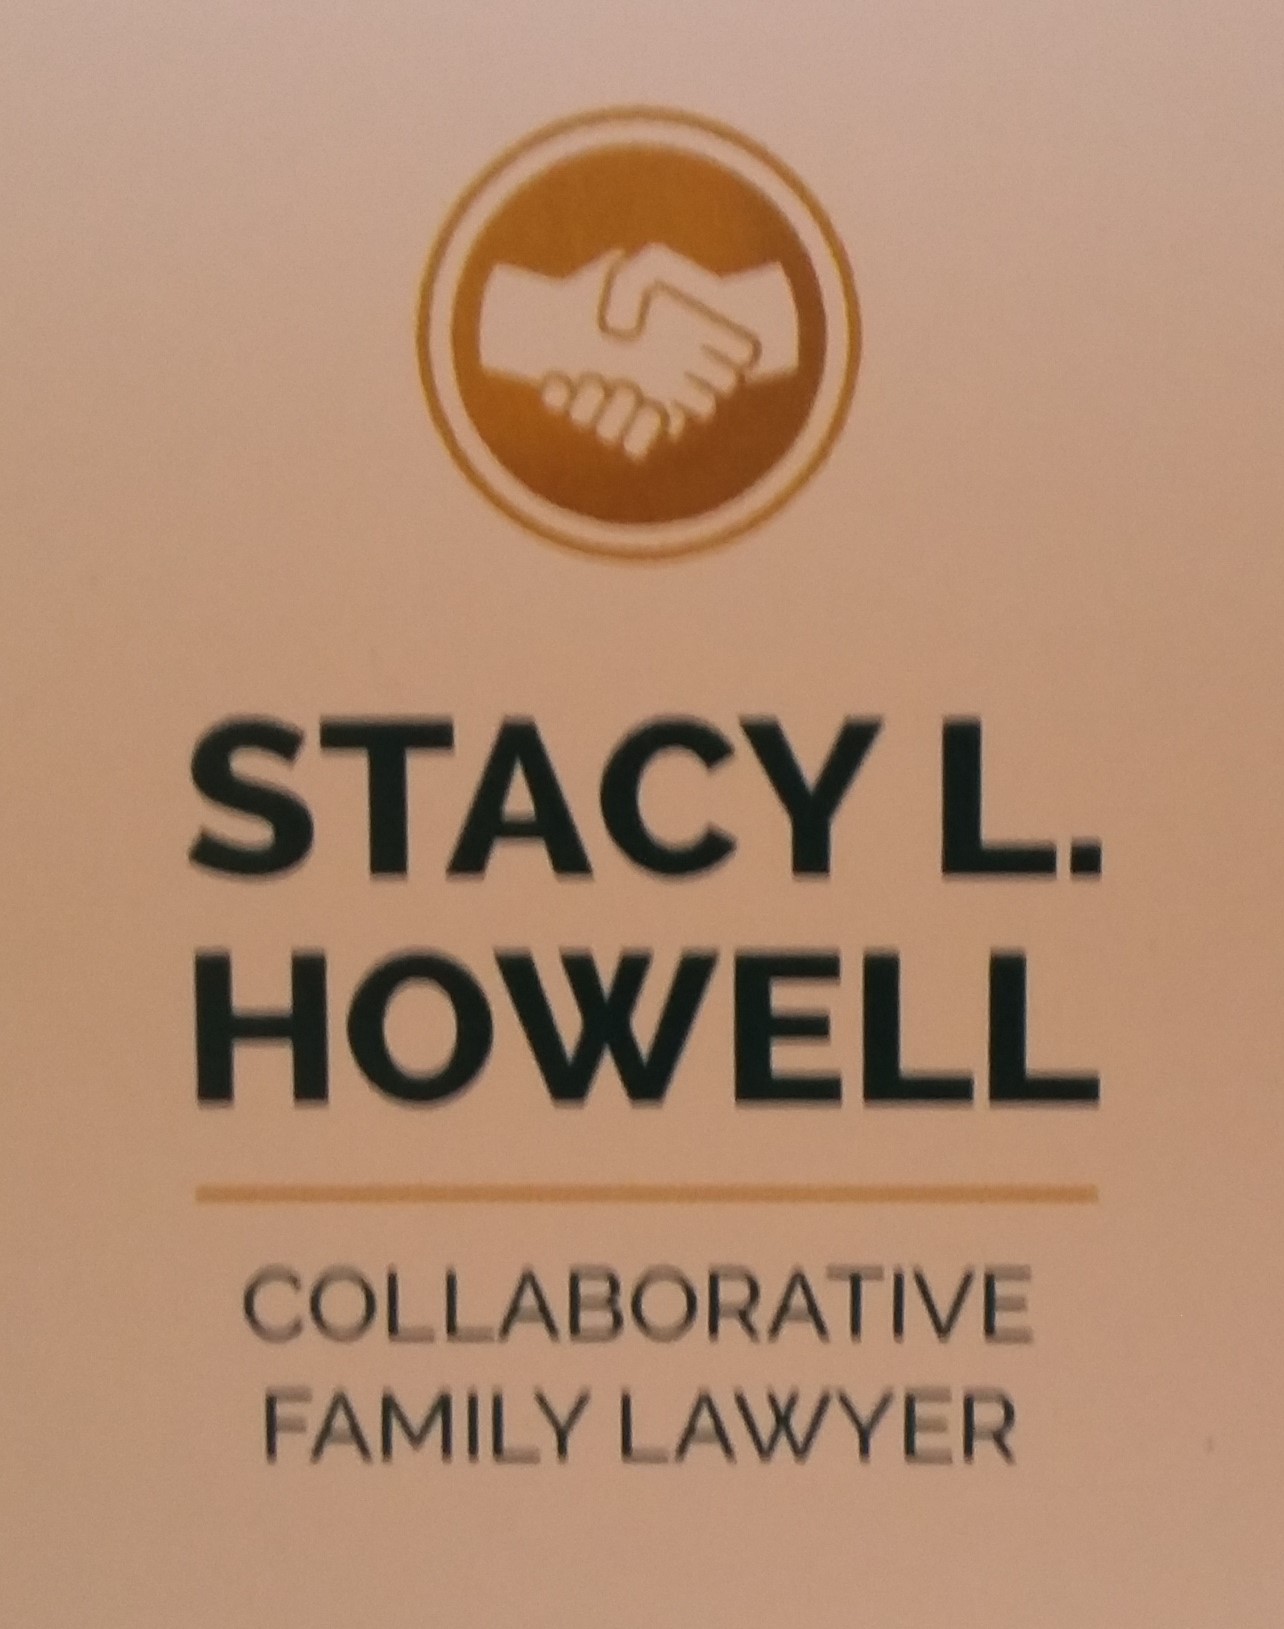 Stacy L. Howell, Collaborative Family Lawyer